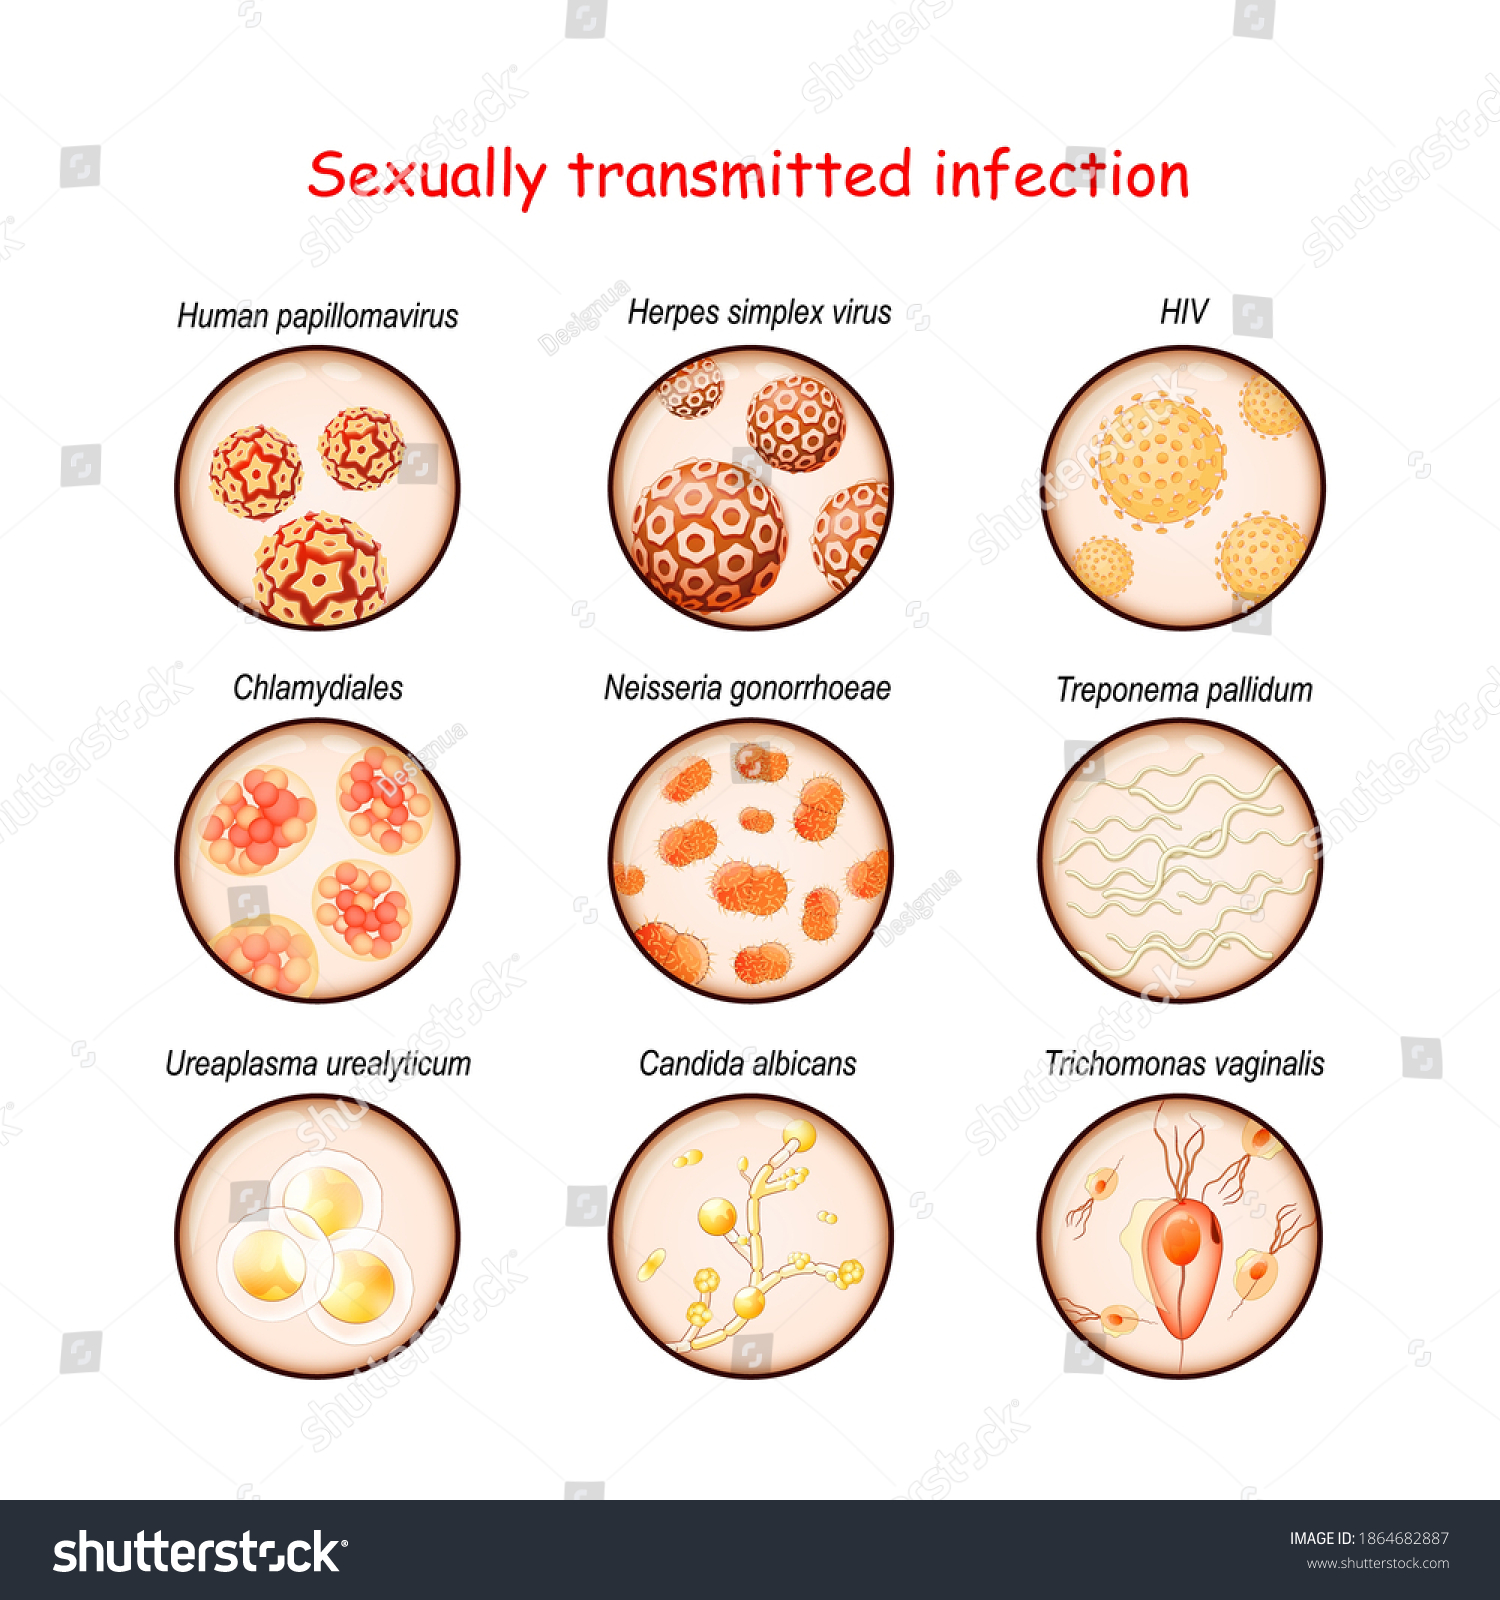 Sexually Transmitted Infection Closeup Causative Agents Stock Vector Royalty Free 1864682887 5414